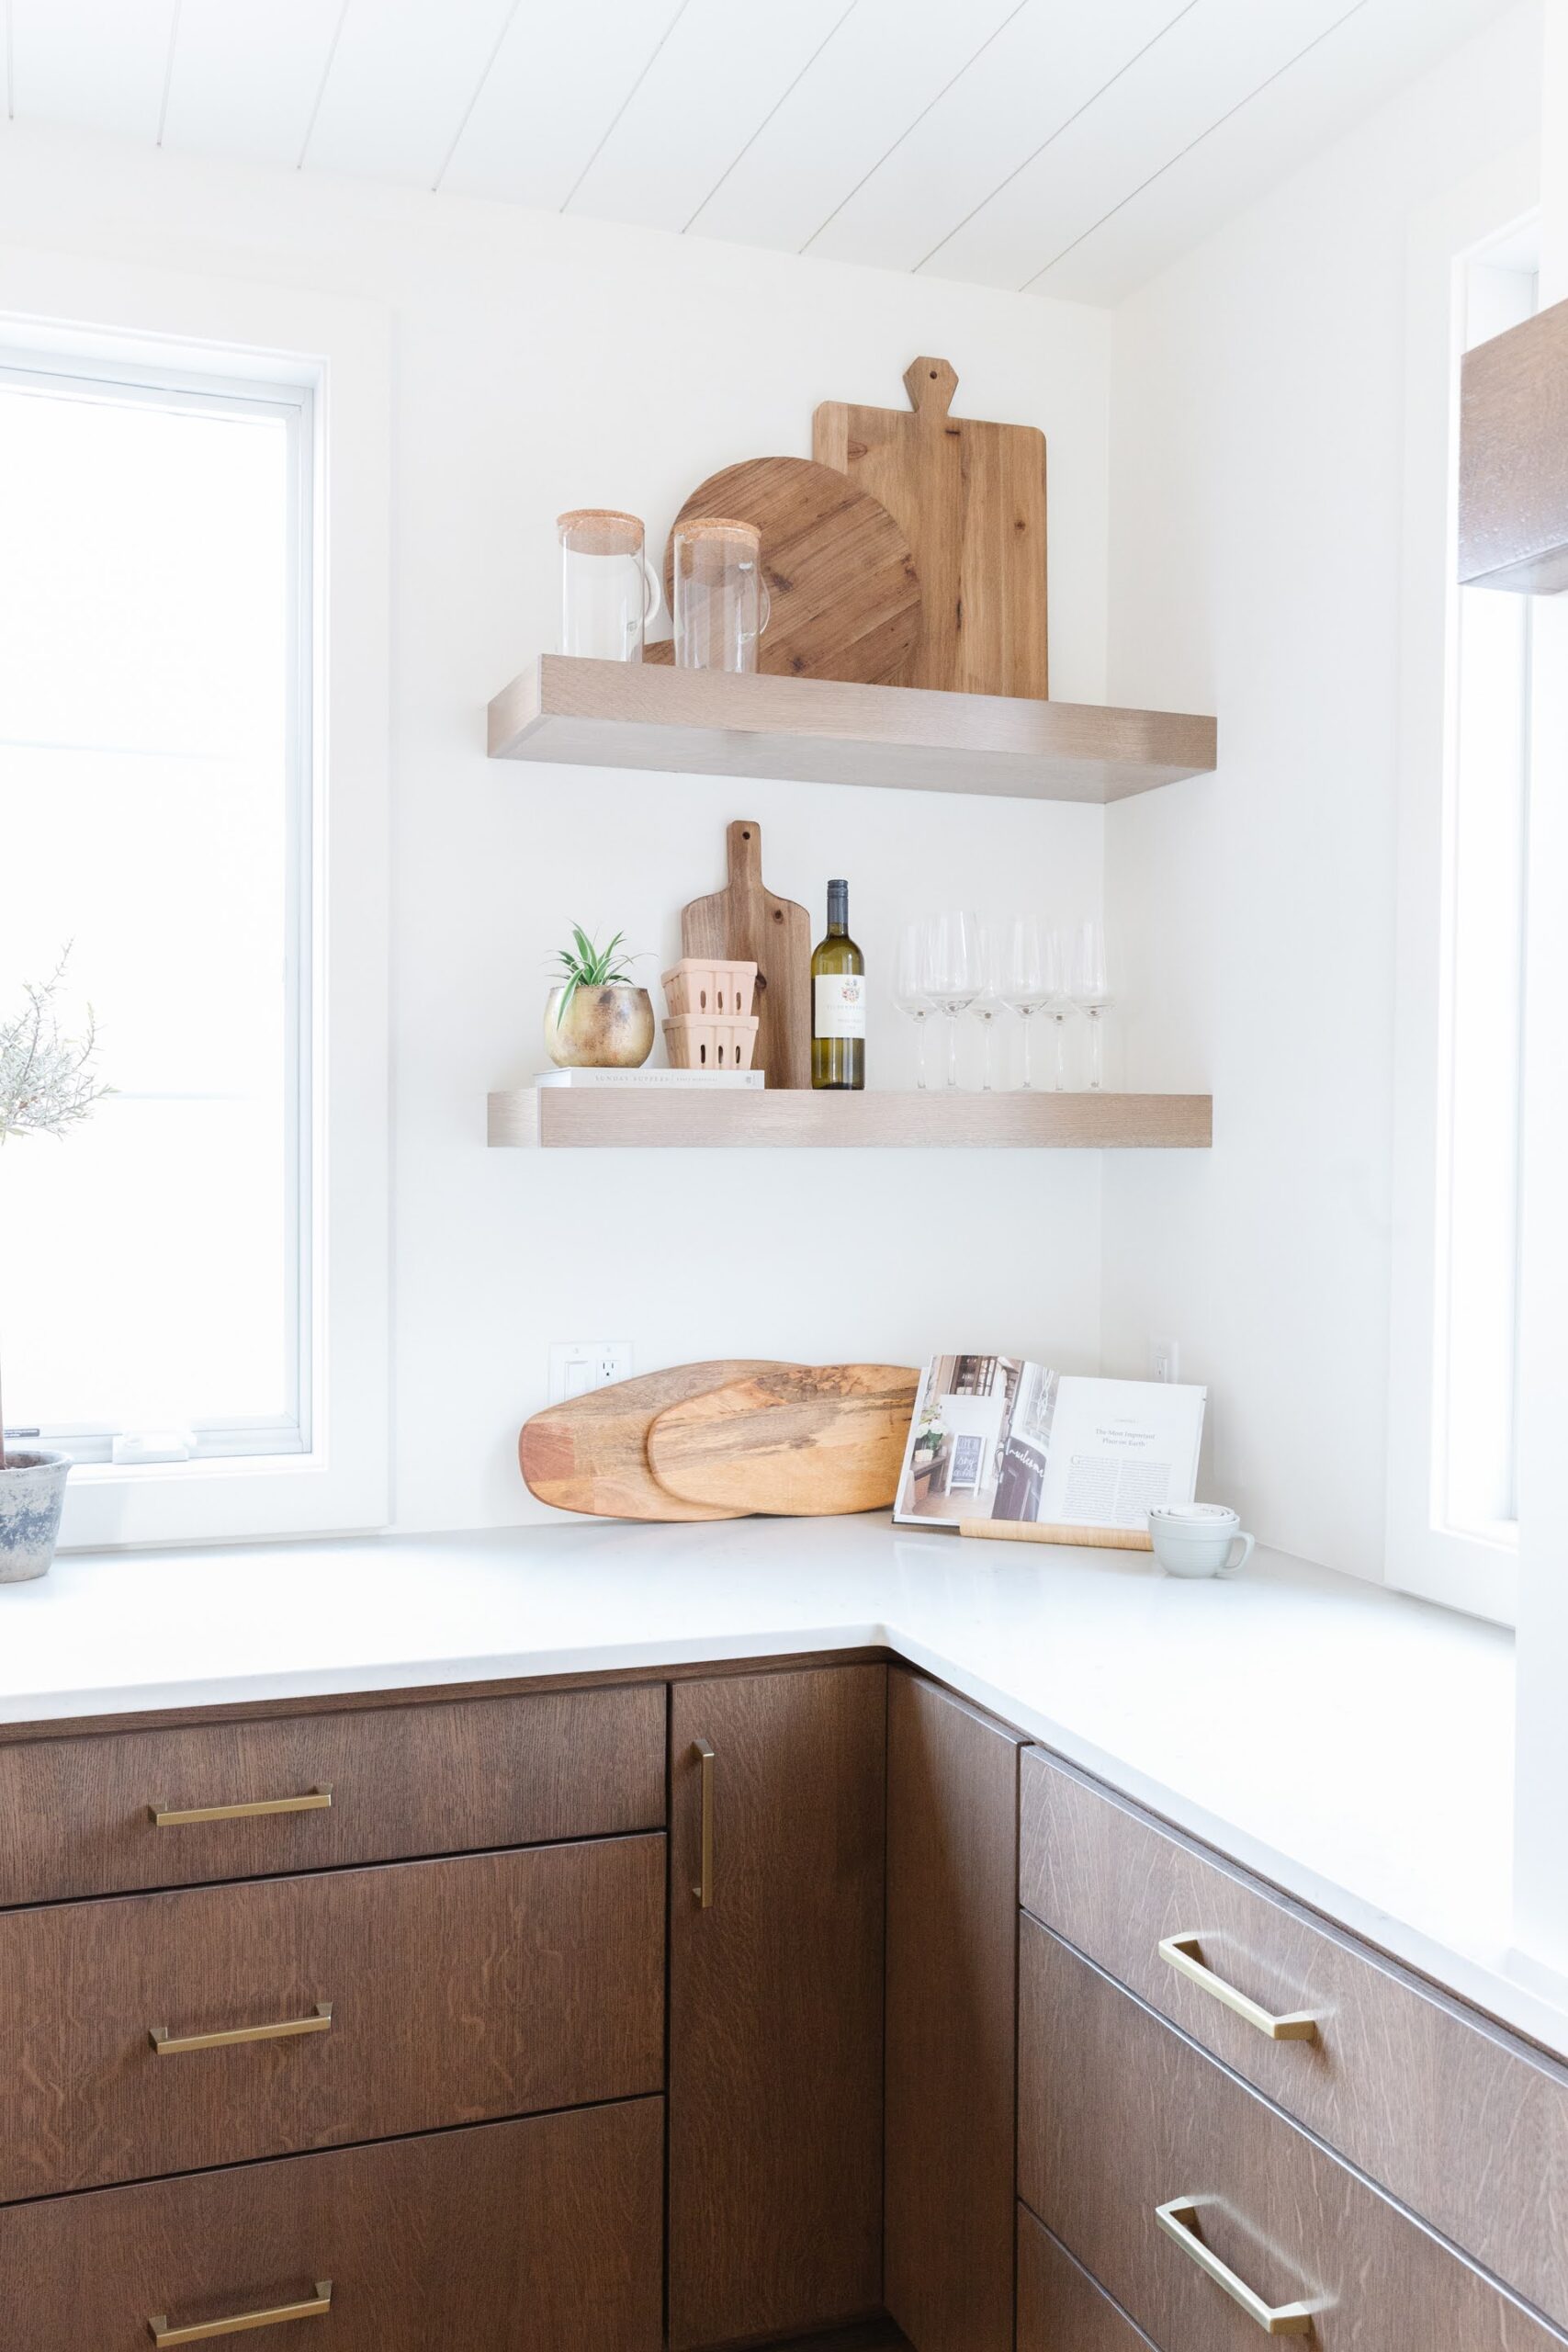 HOW TO STYLE KITCHEN OPEN SHELVES